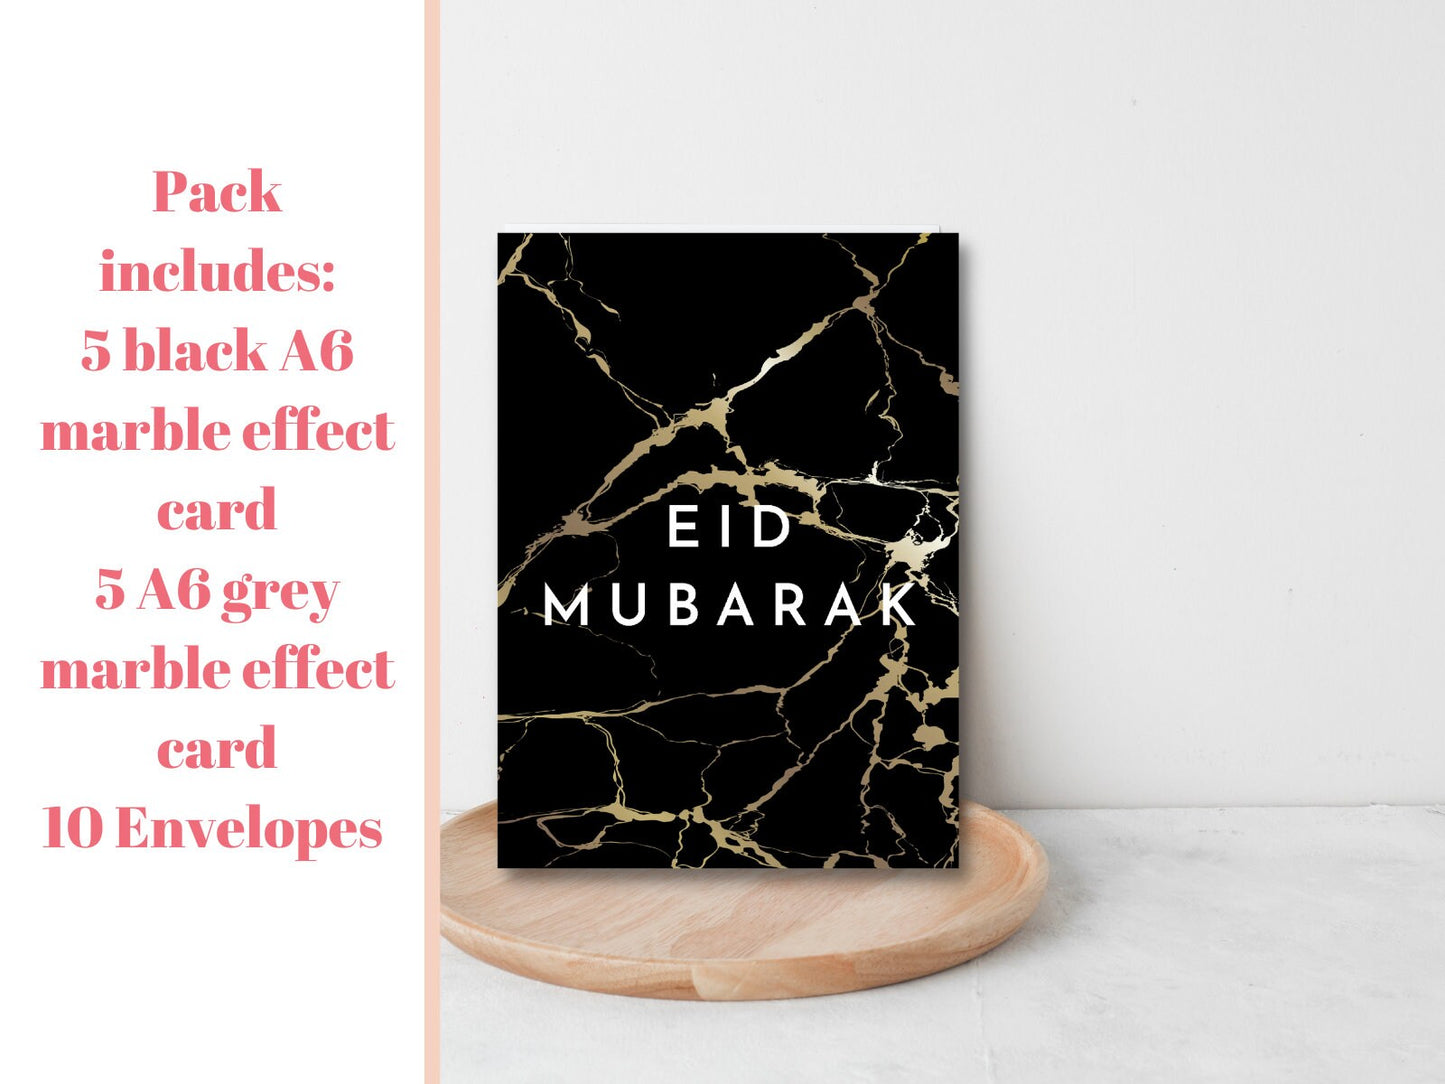 Pack of 10 Eid Mubarak greeting cards, 5 black and 5 grey with 10 envelopes, Great value Eid Mubarak cards with envelope